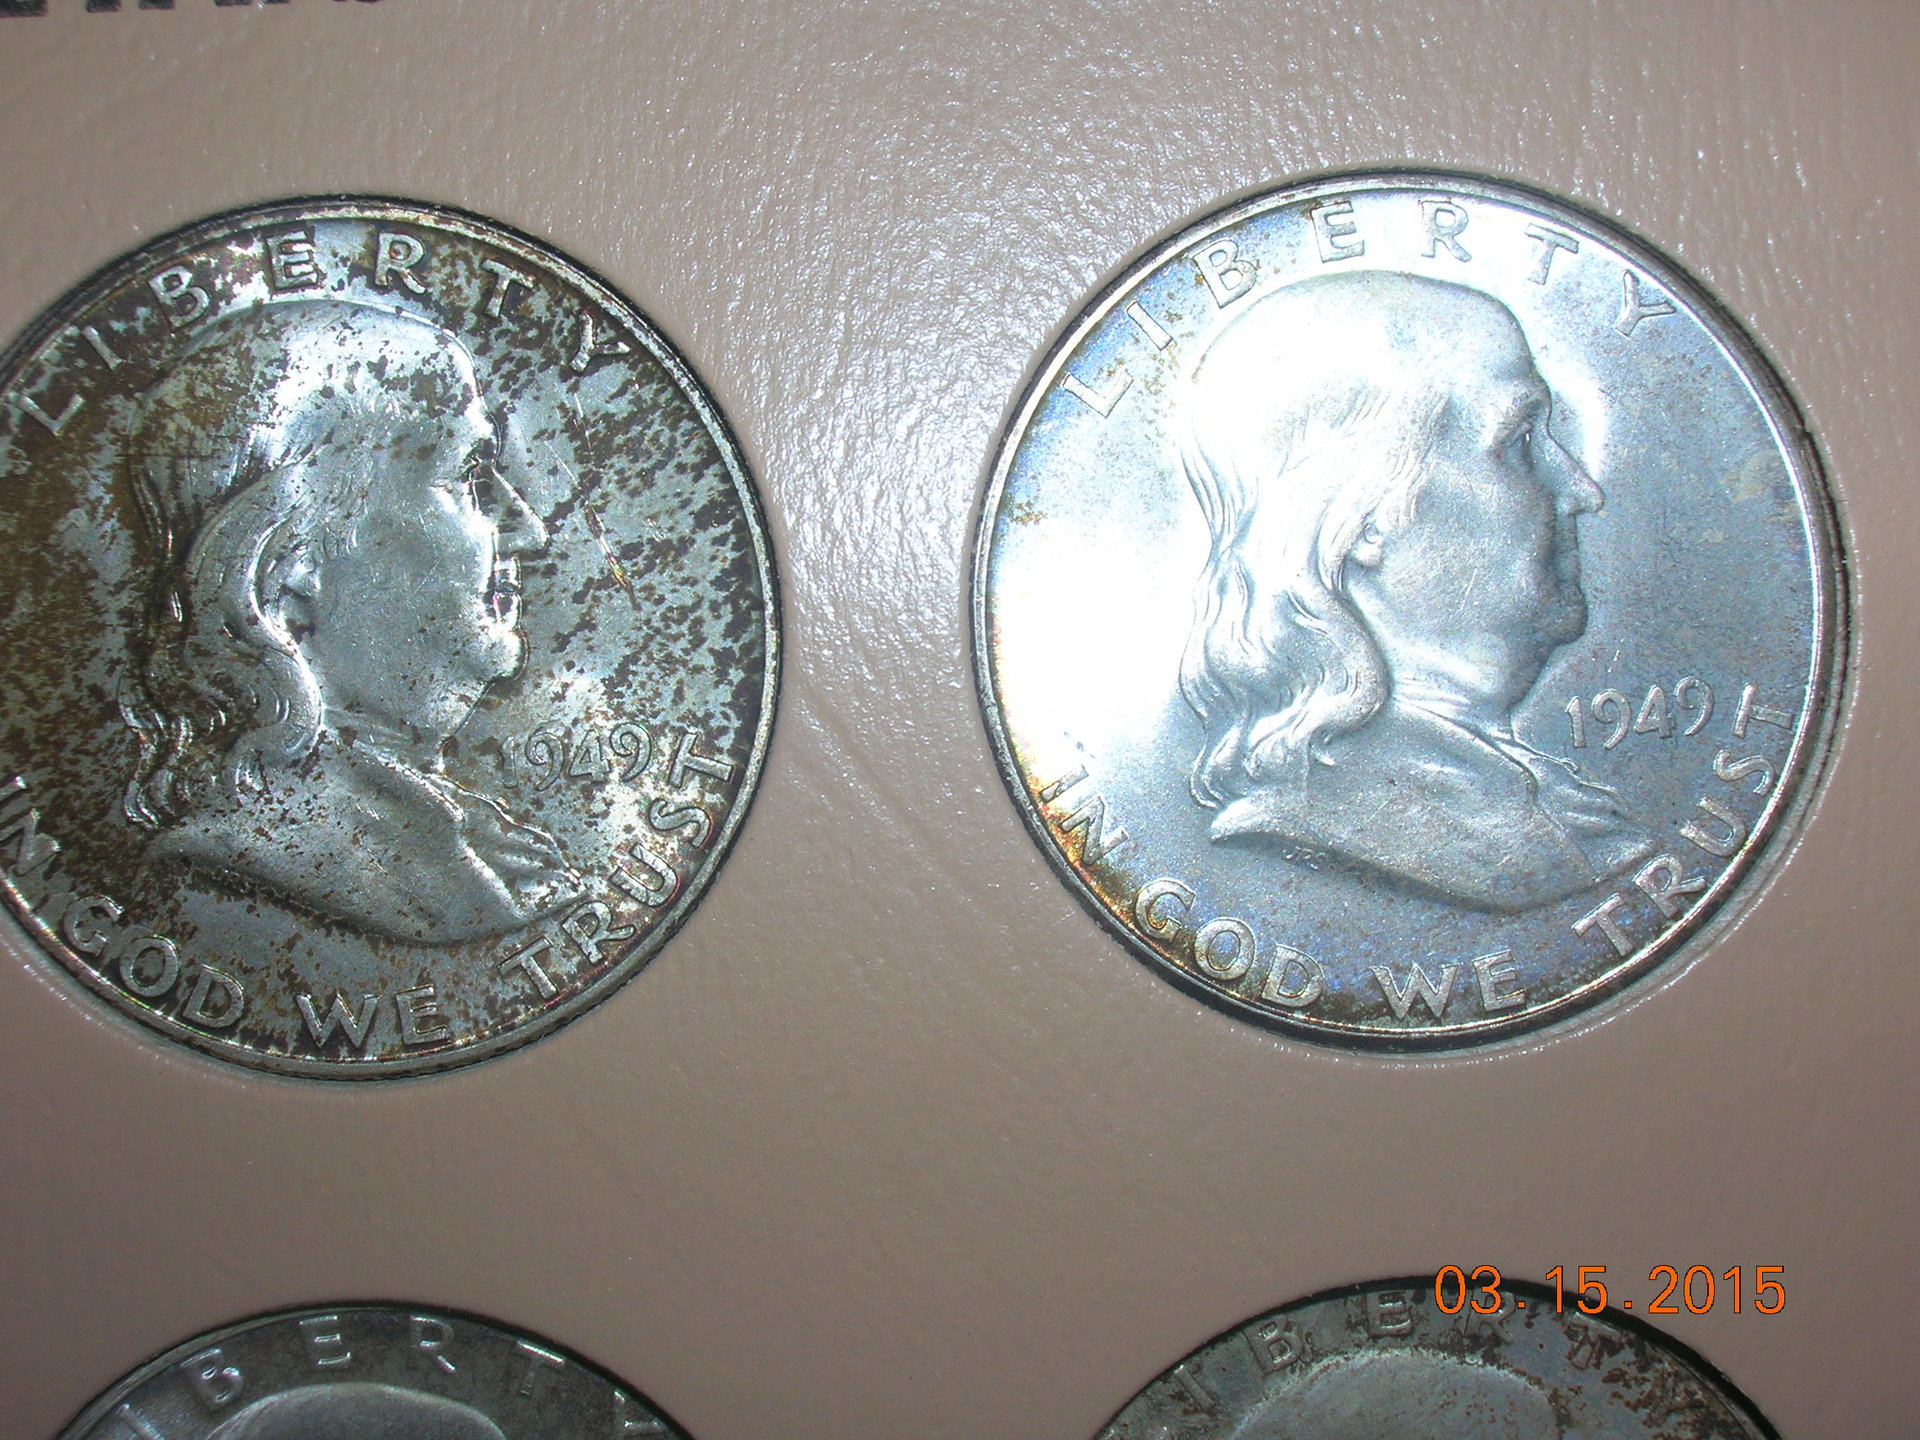 1949and1949fextra.JPG